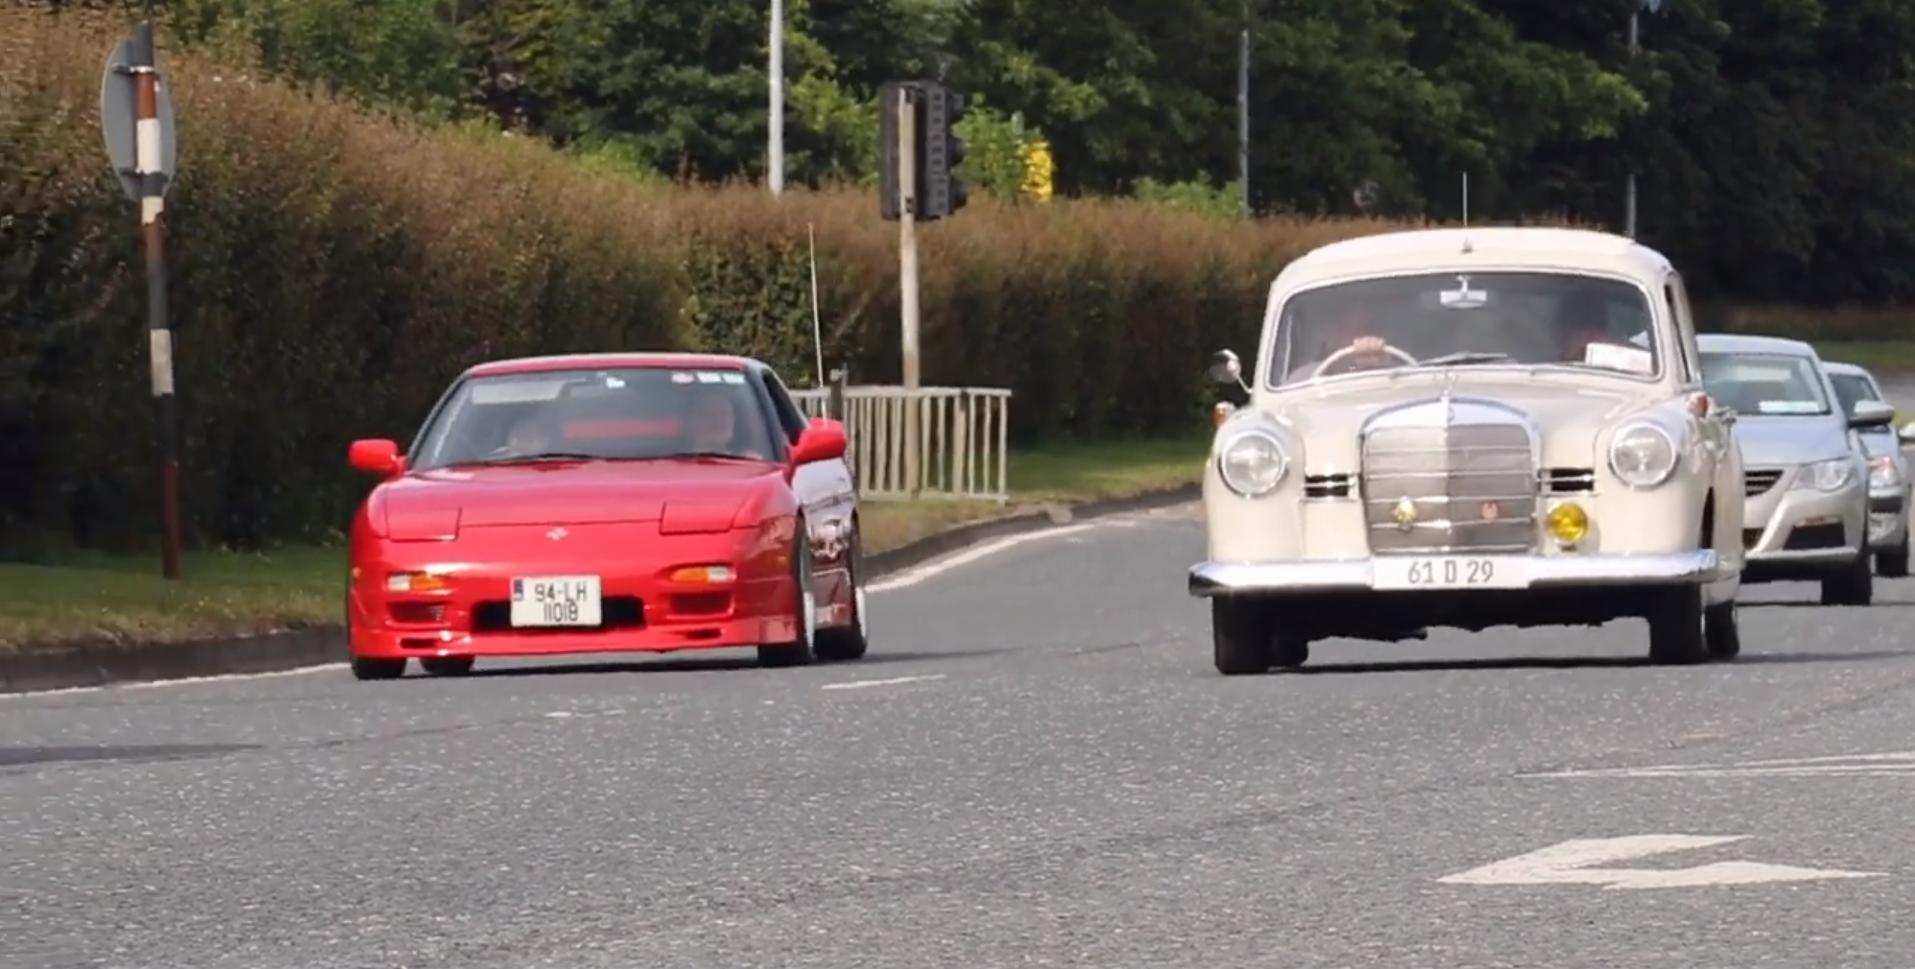 The Classic Cars Of Ireland